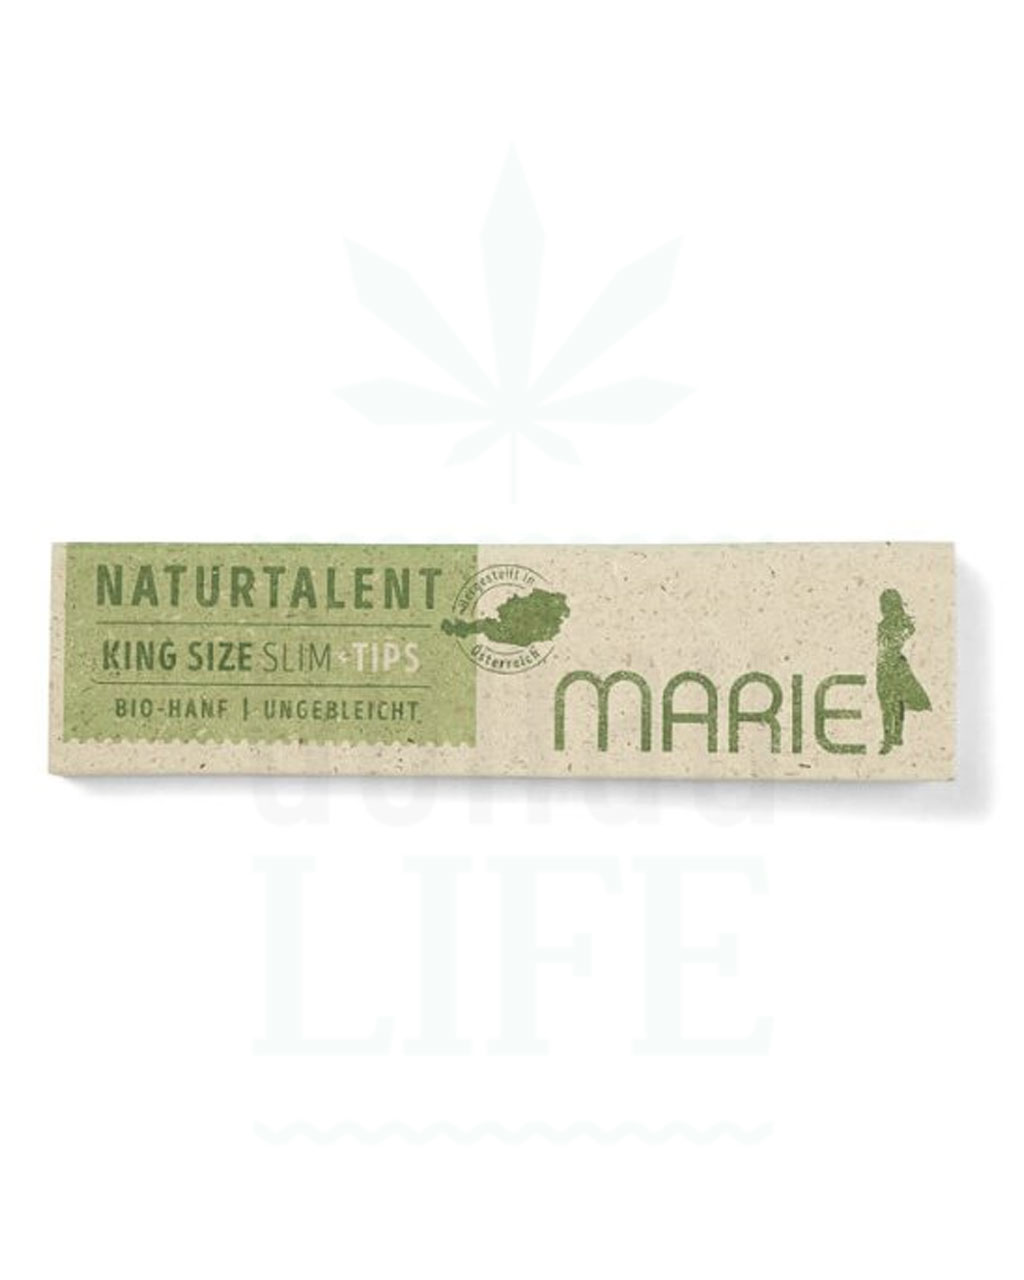 Papers MARIE ‘Naturtalent’ Kingsize + Tips Rolling Papers